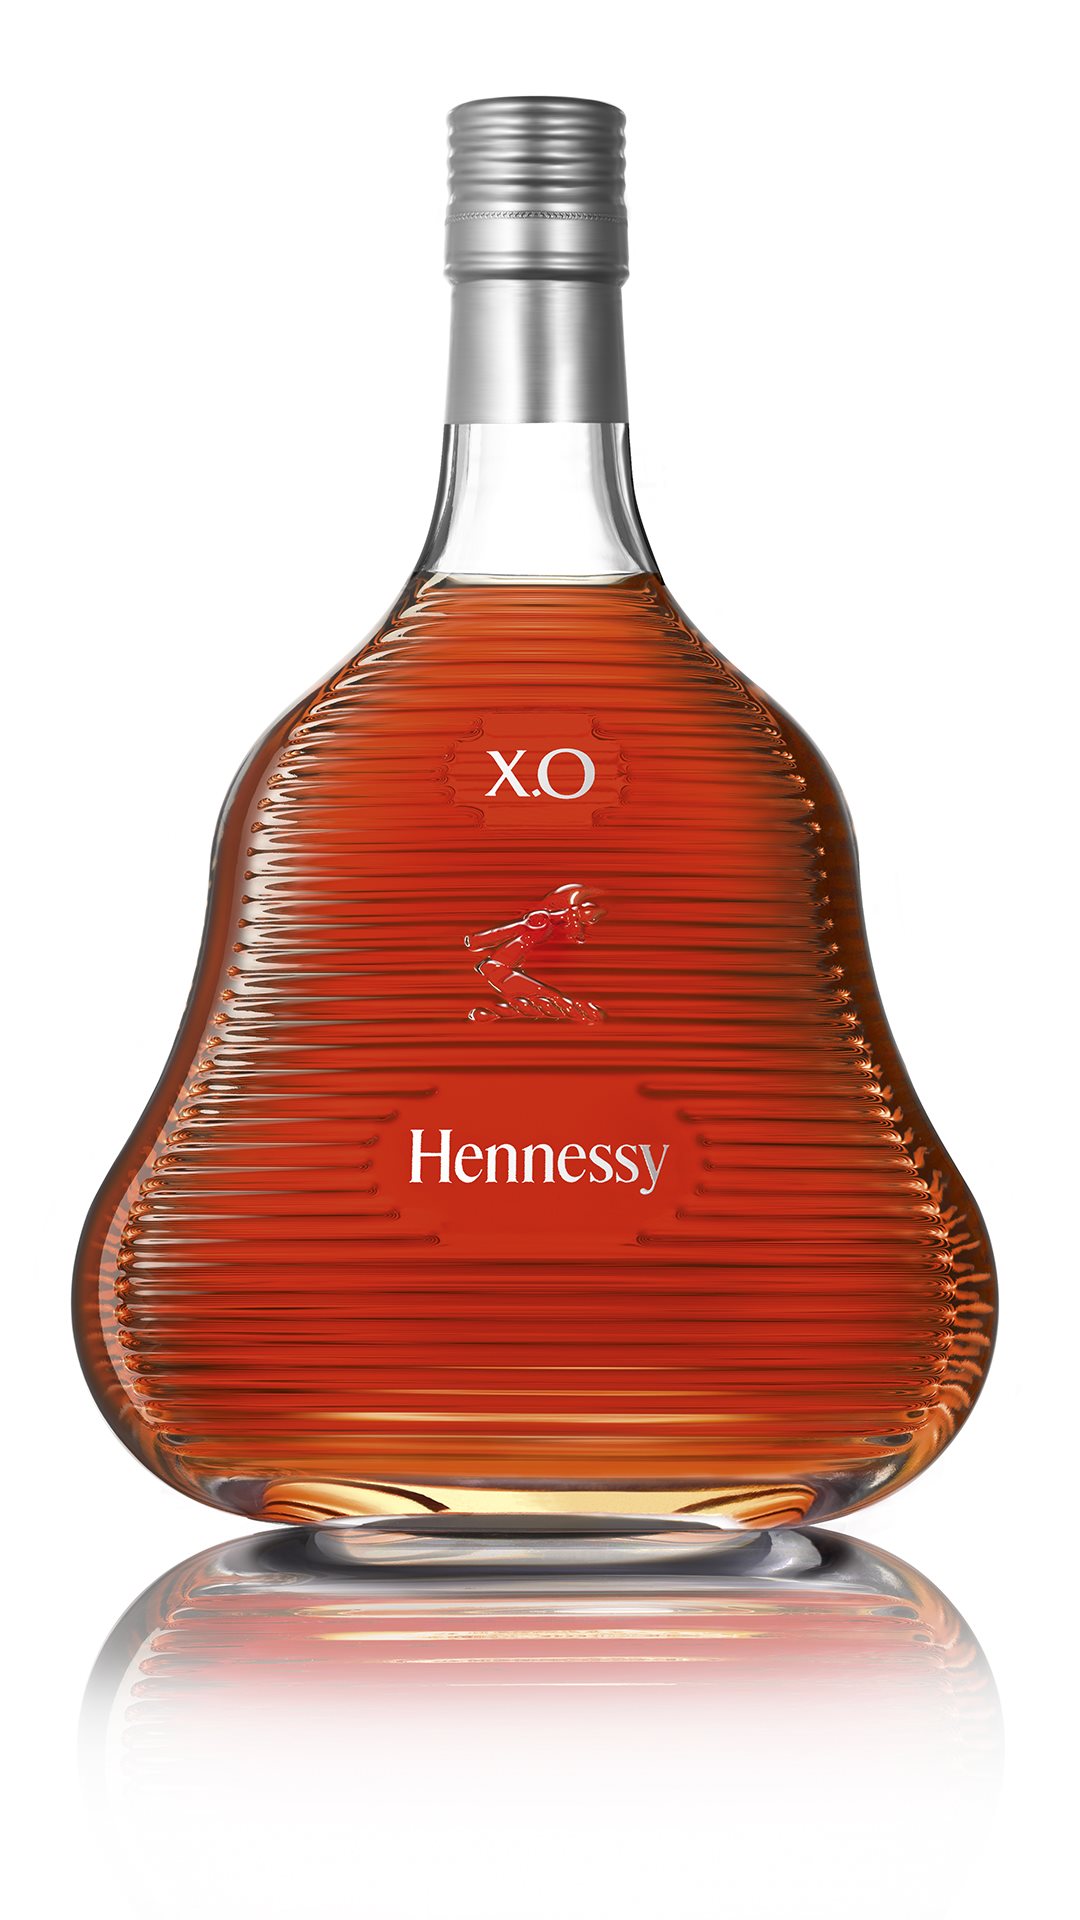 03 Hennessy X.O 2017 - Limited Edition by Marc Newson